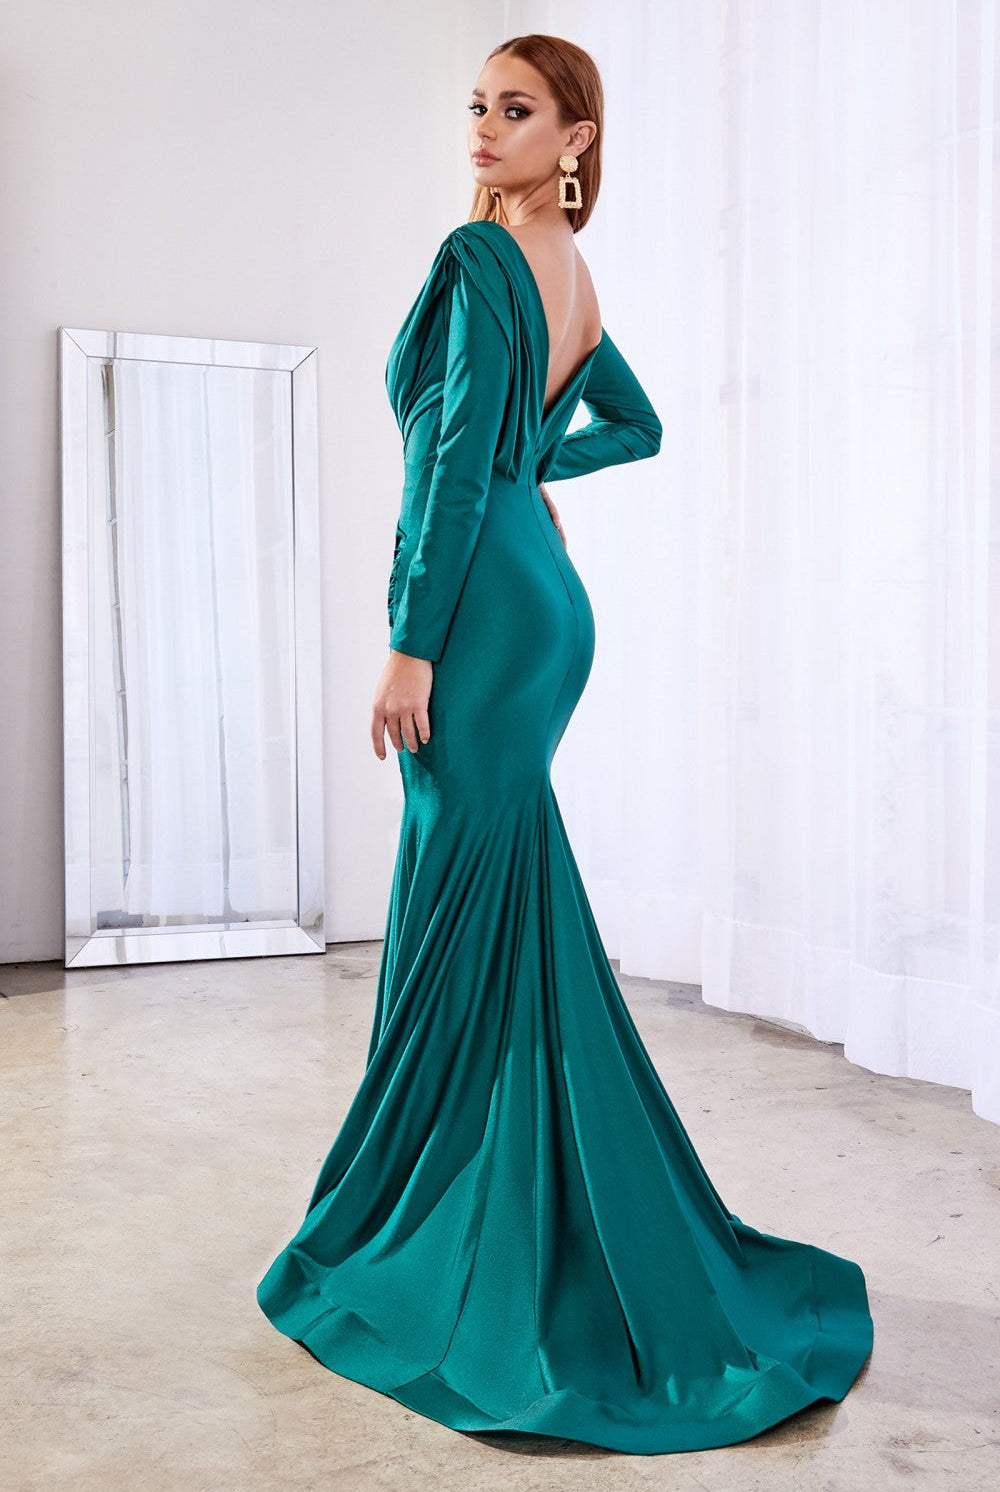 Fitted Stretch Jersey Ball Gown Wrapped Bodice with Deep V- Neckline Classic Sophisticated Silhouette Modest Long Sleeves CDCD0168 Sale-Mother Of The Bride Dress-smcfashion.com